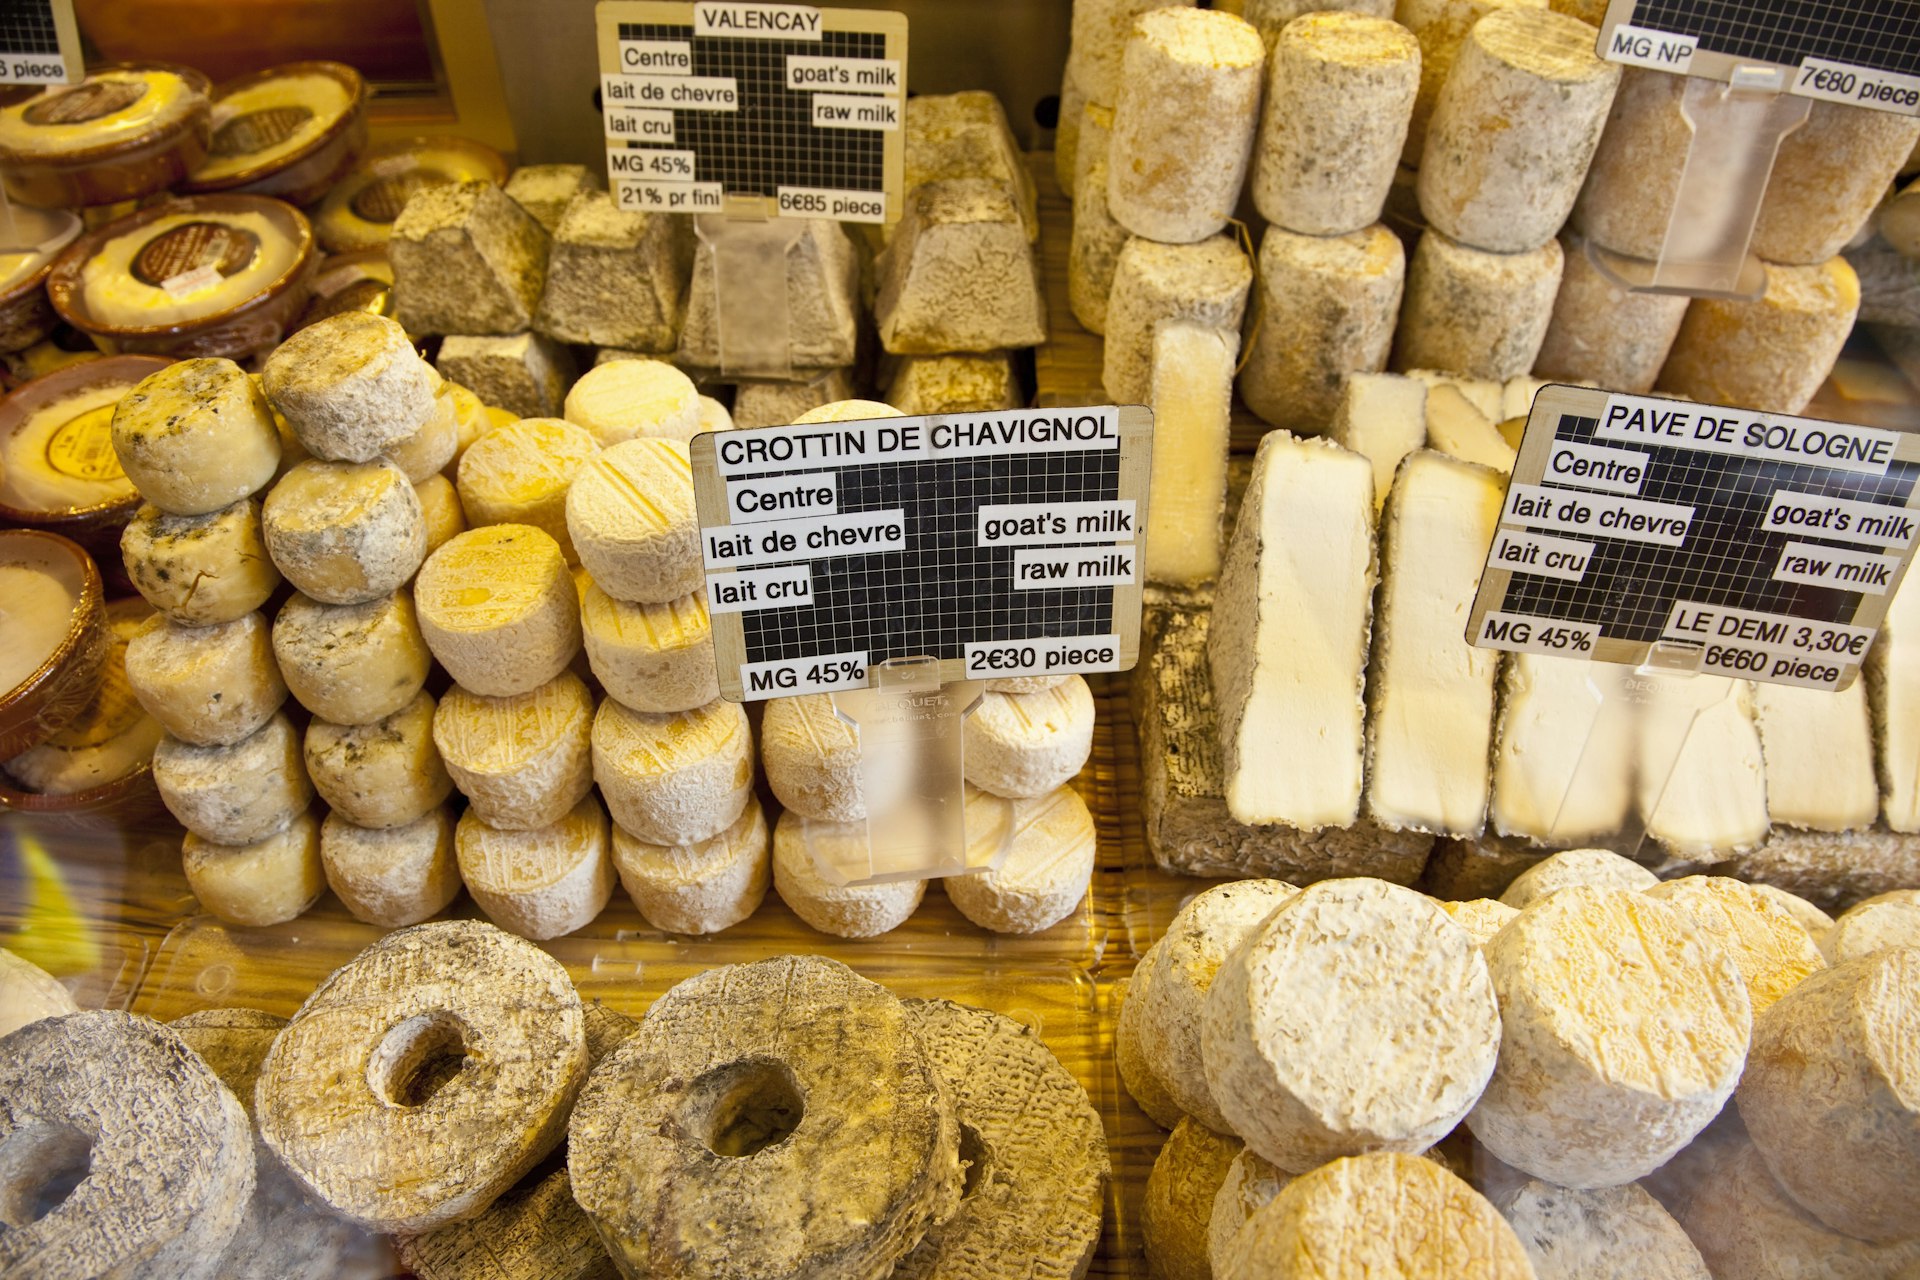 Various kinds of cheese for sale at a street market on Rue Mouffetard in Paris